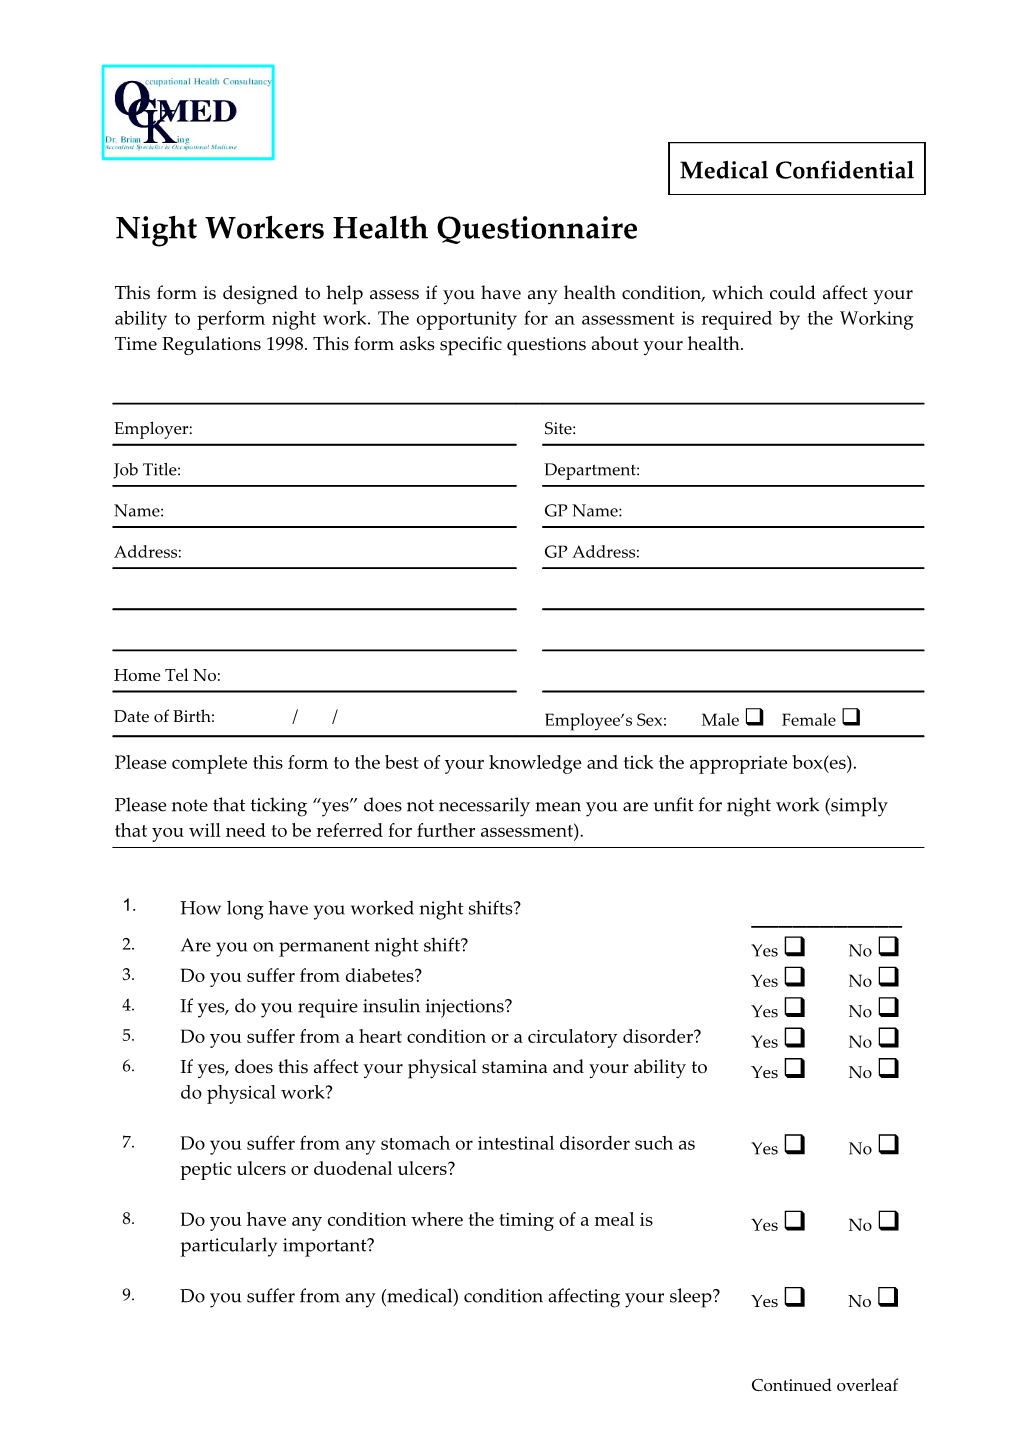 Night Workers Health Questionnaire